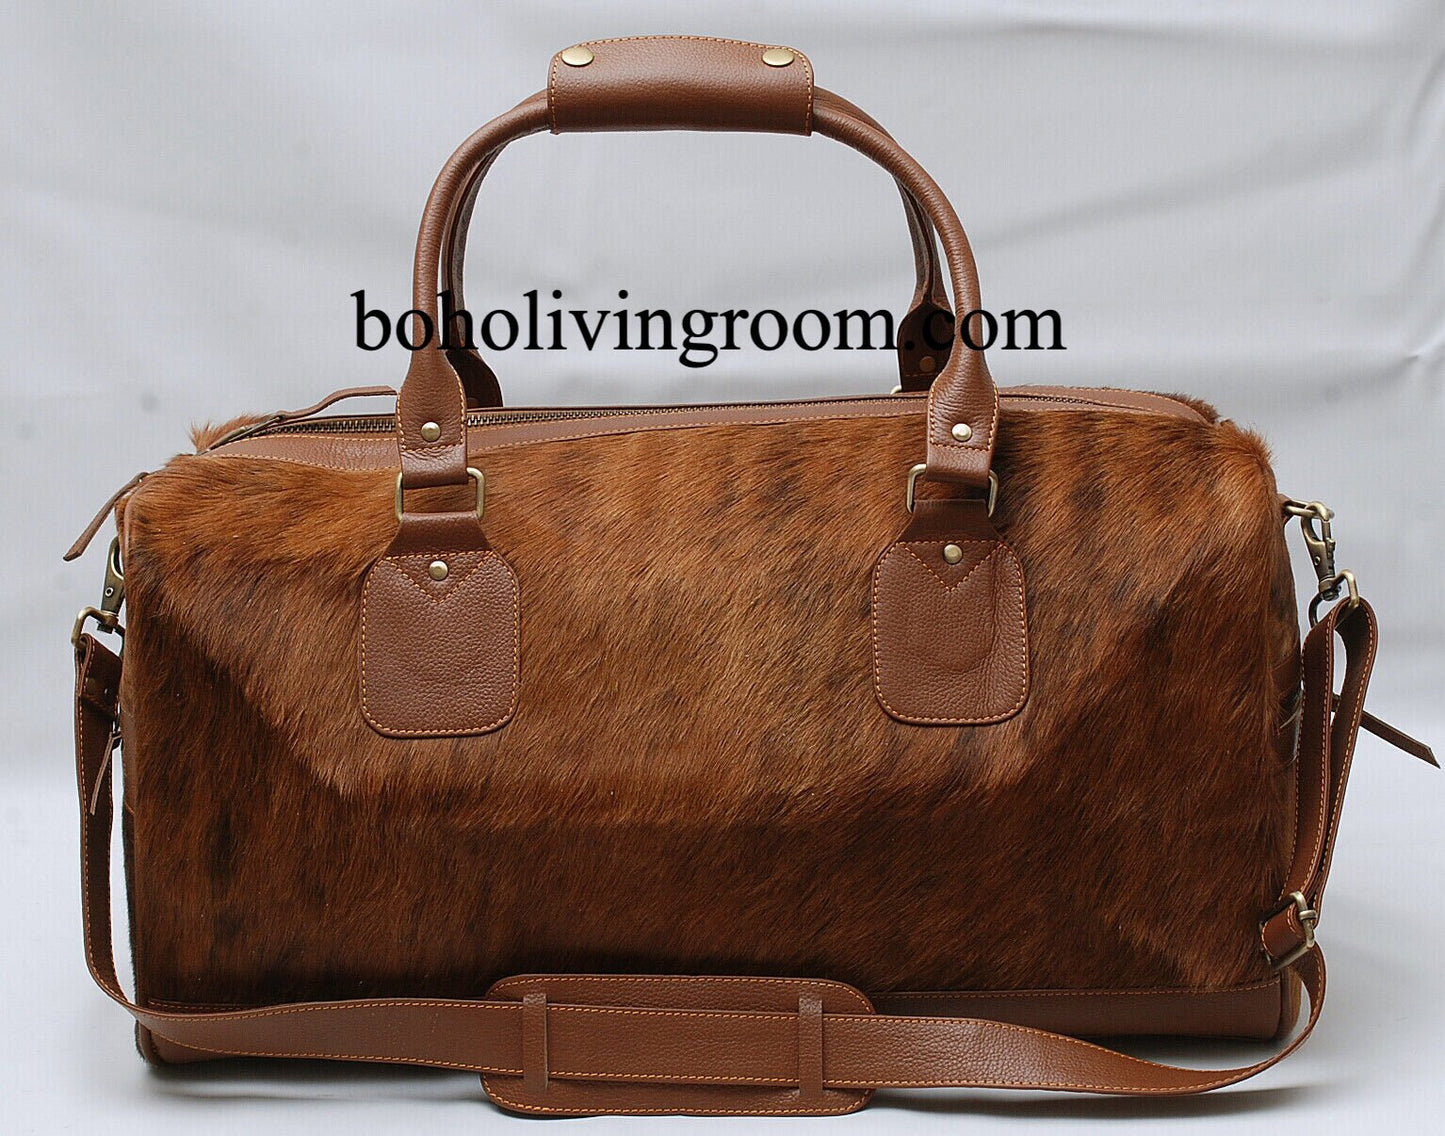 Cow skin travel bag: sleek design, spacious and reliable, perfect for adventures.